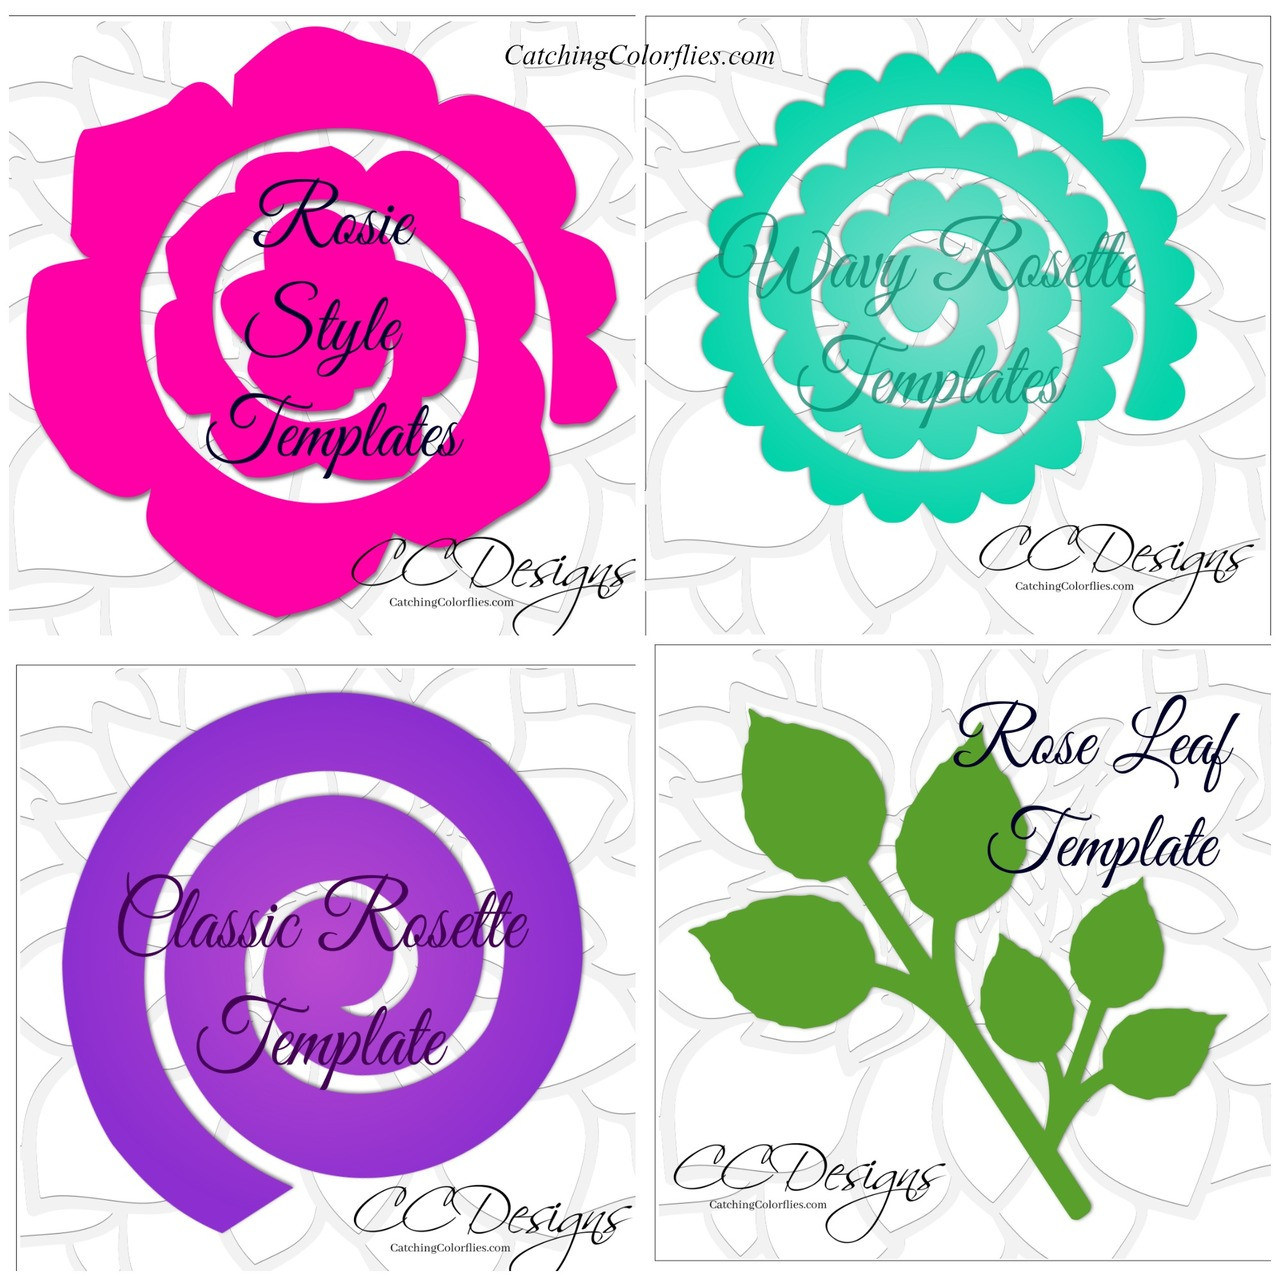 Giant Flower Template Set of 16 Flower Templates, plus Leaves, and Centers  - Catching Colorflies